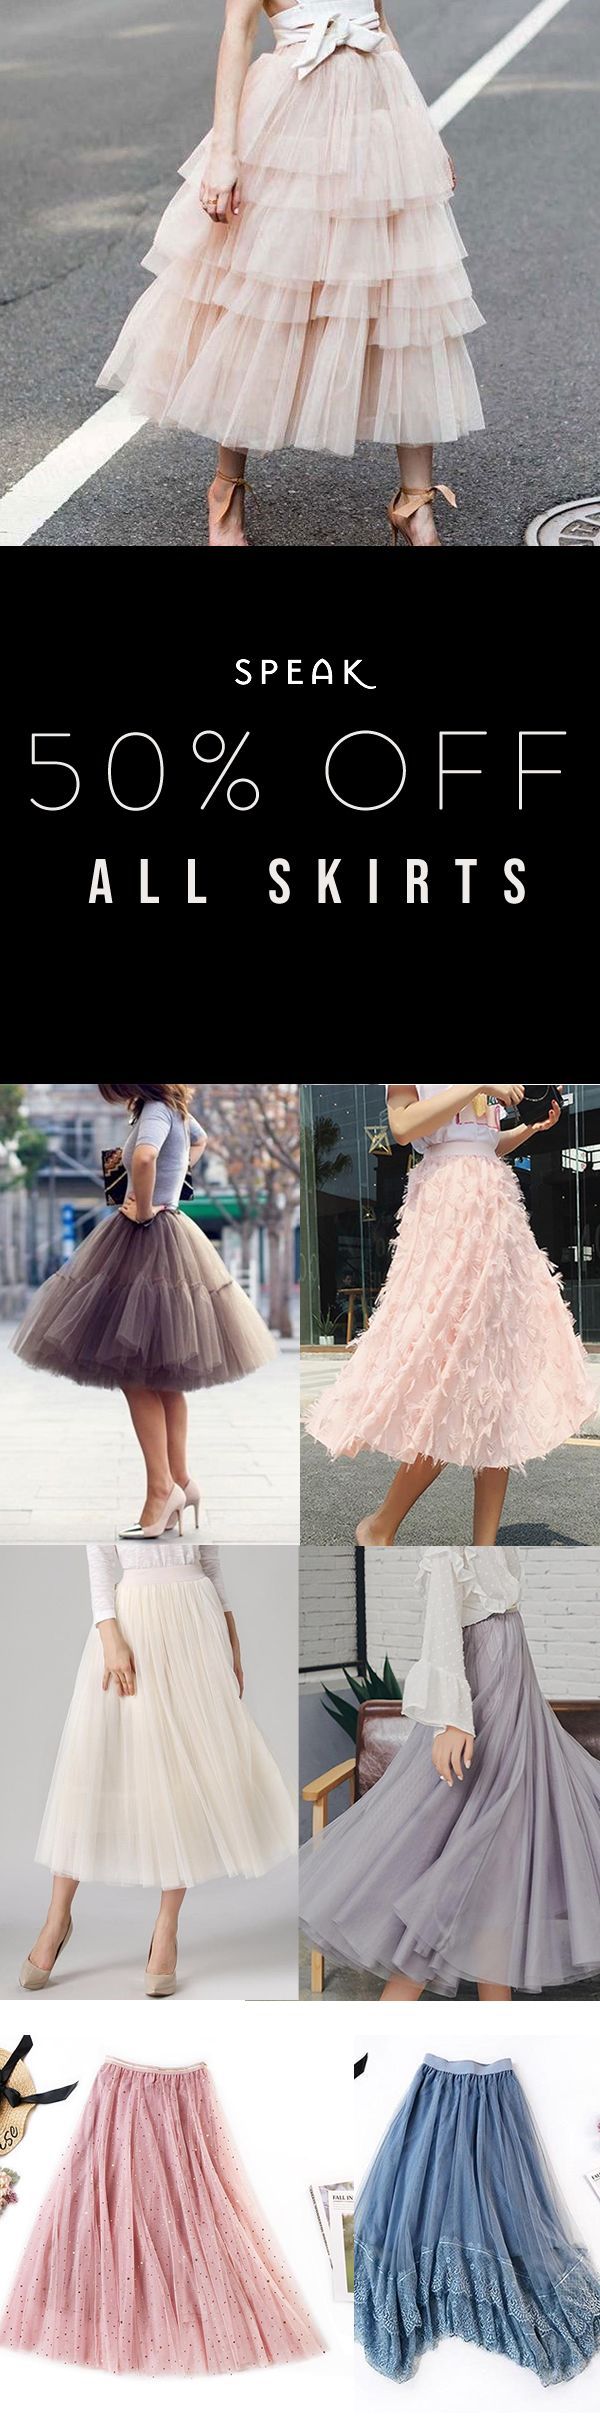 Tulle Skirt Sale! 50% Off (or more) all skirts at Speak. -   16 fashion fitness wear
 ideas